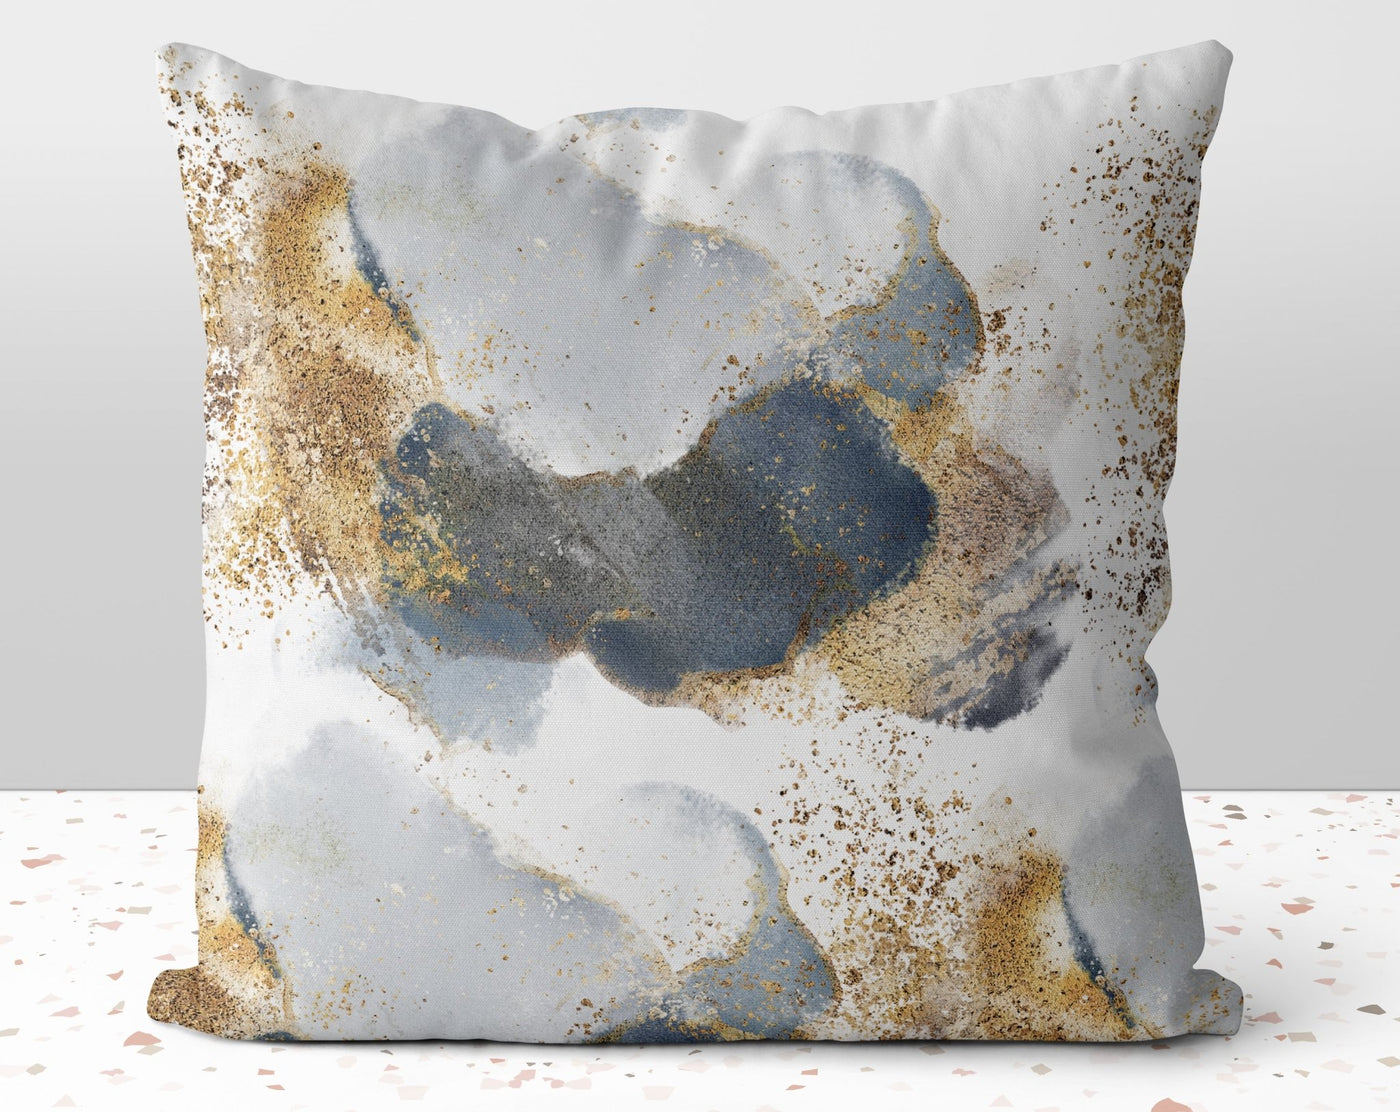 Glam + Chic Bluey Blue Gray with Gold Printed Accents Pillow Throw Cover with Insert - Cush Potato Pillows